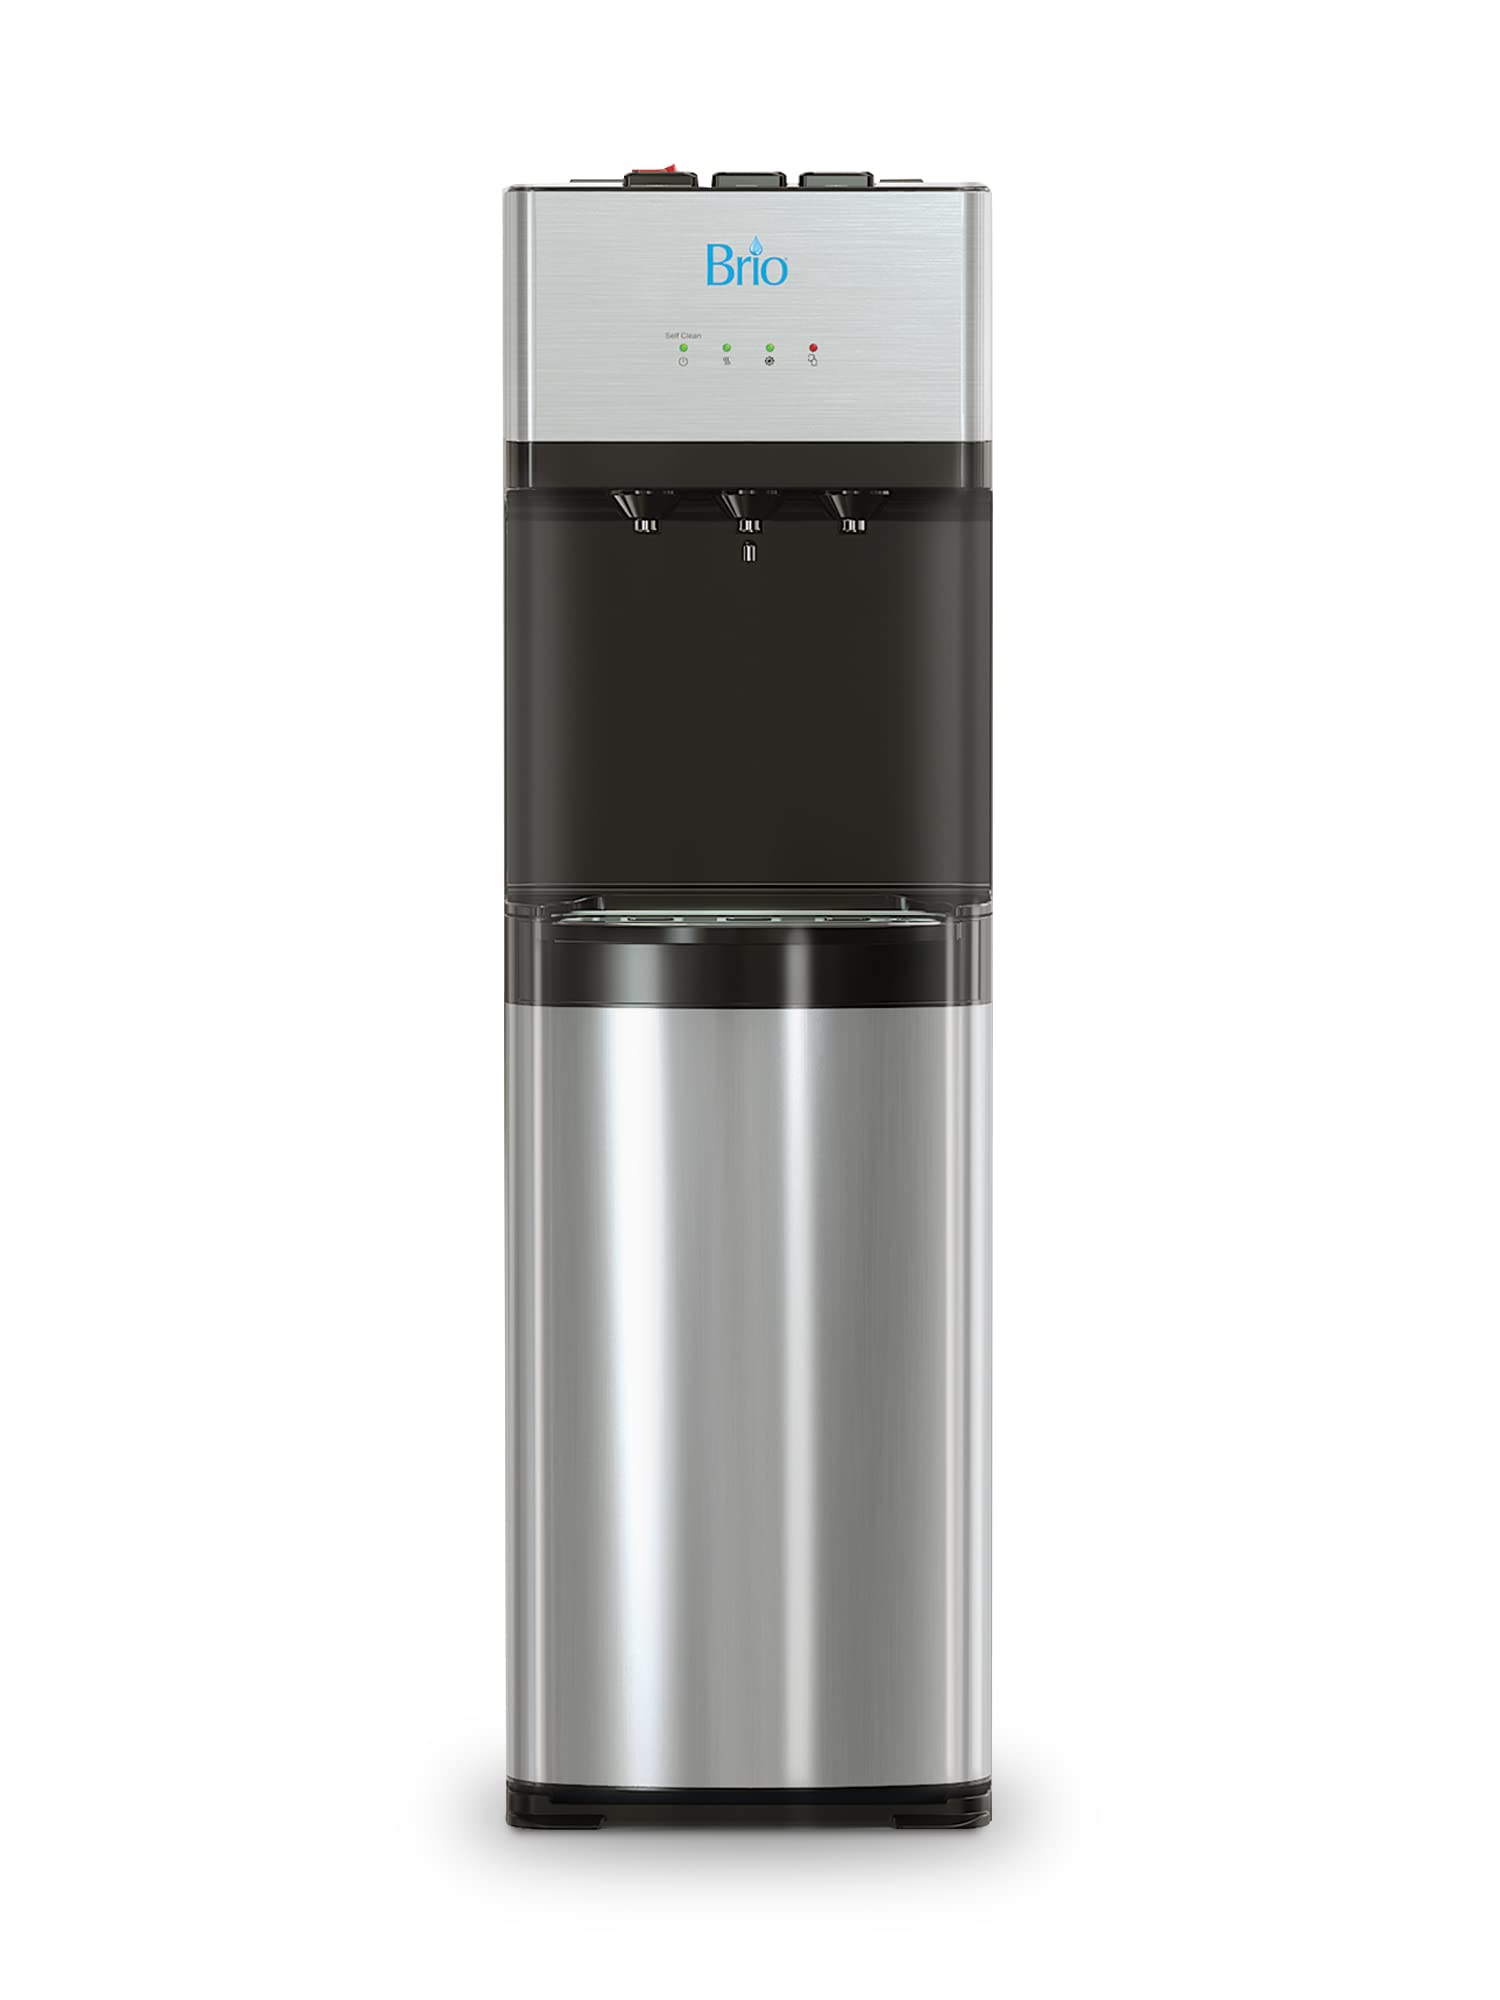 Brio CLBL520SC Self-Cleaning Bottom Load Water Cooler Dispenser for 3 & 5 Gallon Bottles – Hot, Room & Cold Spouts, Child-Safety Lock, LED Display & Night Light, Silver Stainless Steel